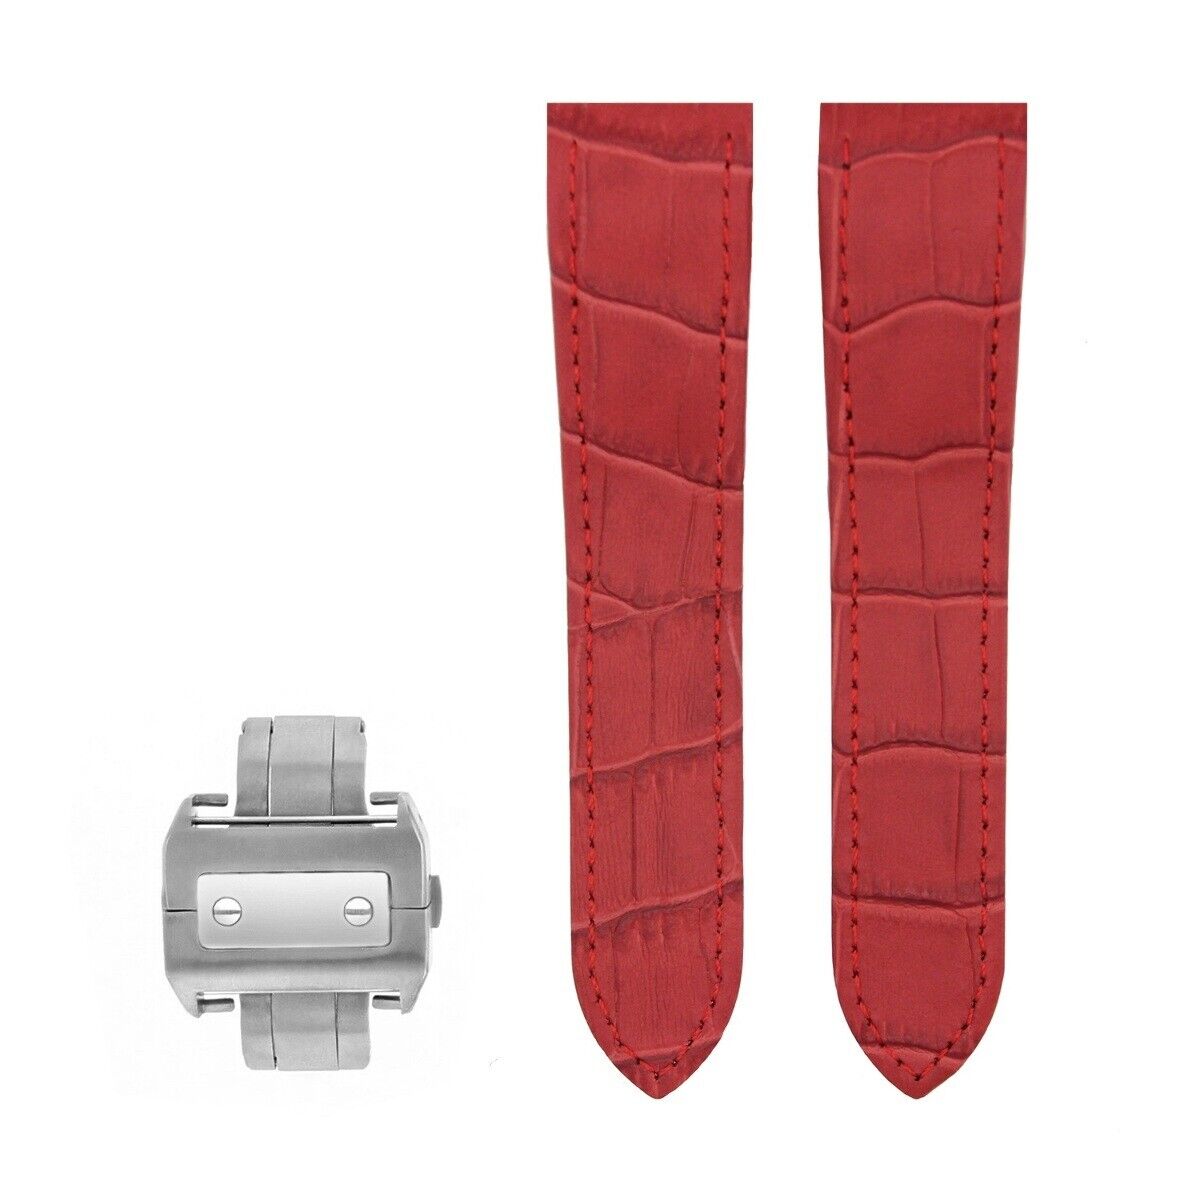 COMPLETE 23MM LEATHER WATCH BAND DEPLOYMENT CLASP FOR 38MM CARTIER SANTOS XL RED - image 1 of 2